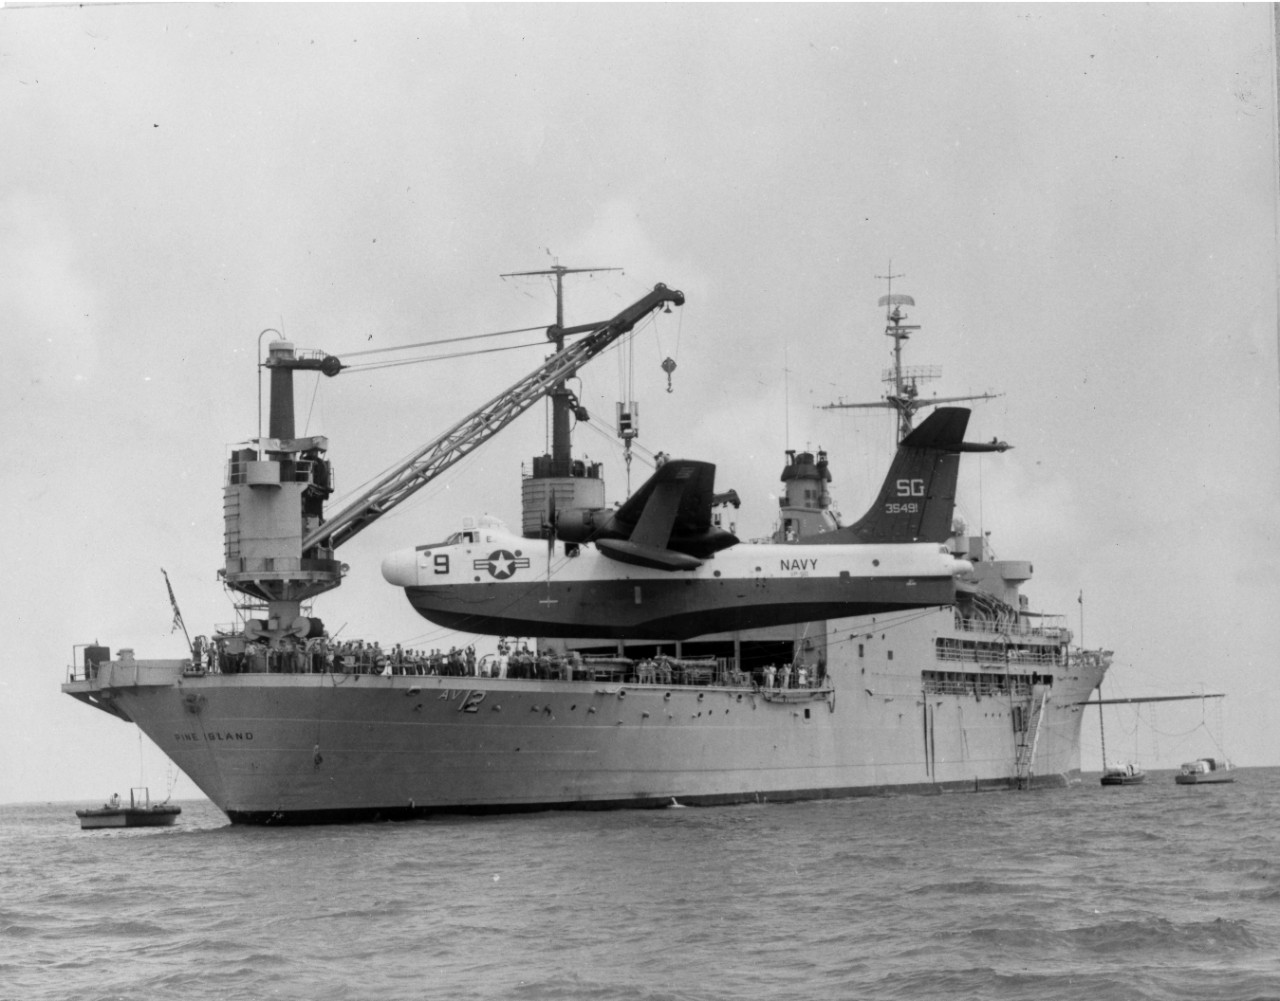 <p>Aircraft being off-loaded from USS&nbsp;<i>Pine Island</i>&nbsp;(AV-12) for a test flight prior to returning to duty. June 1961.</p>
